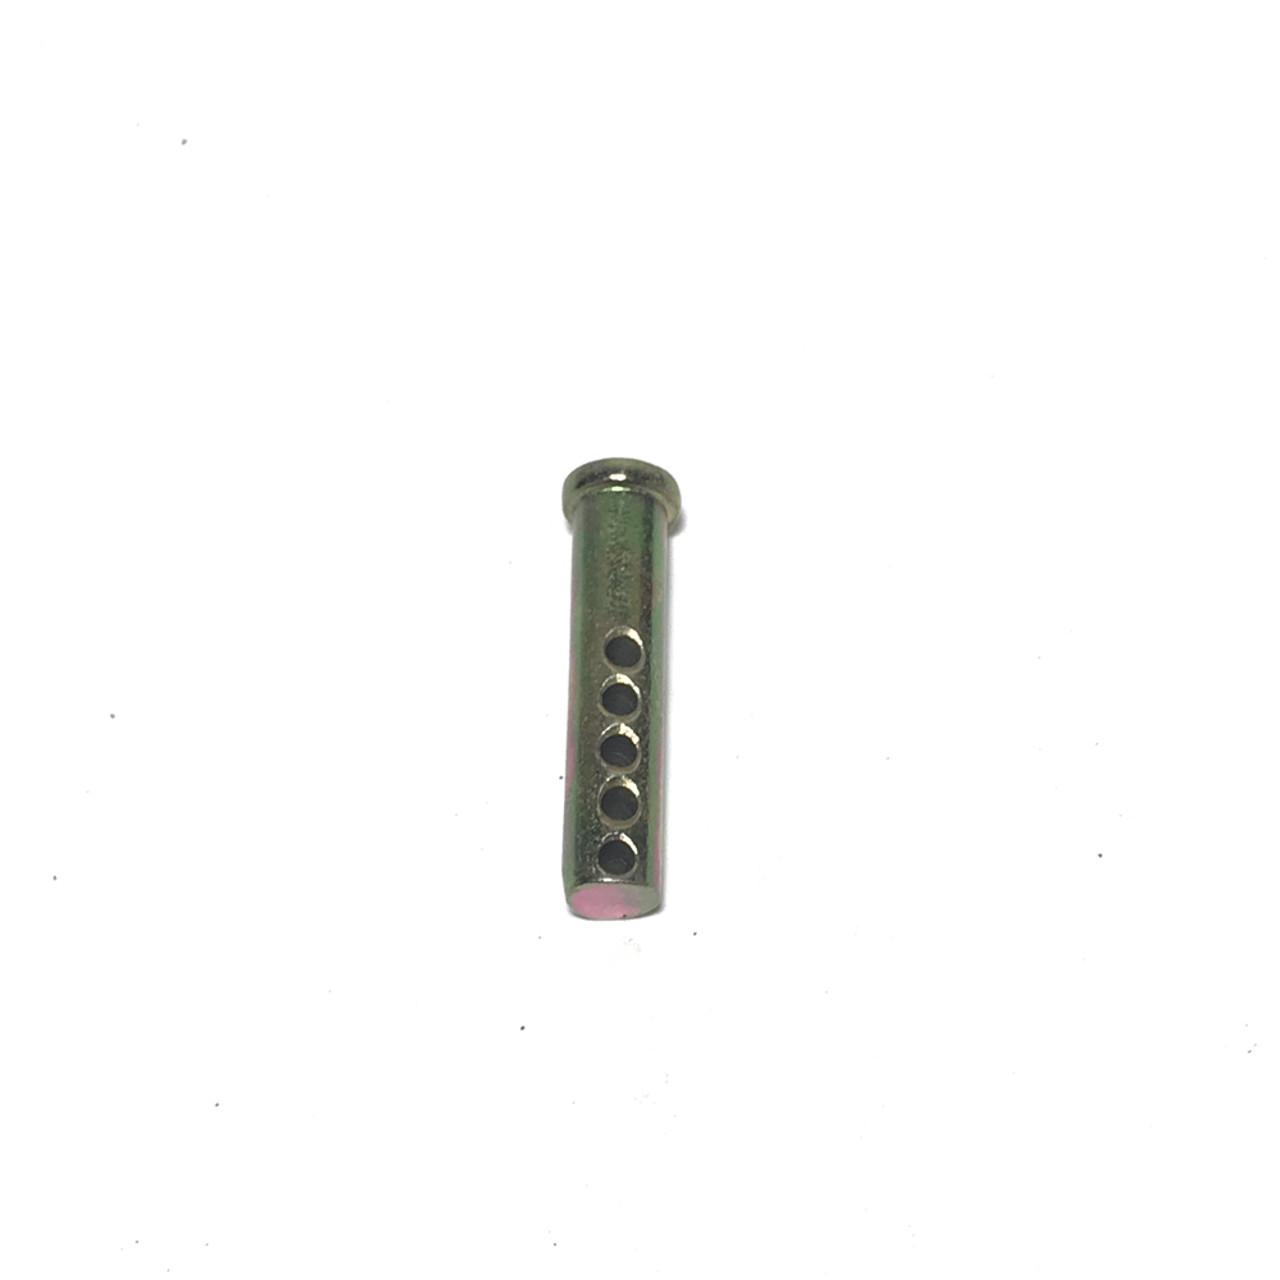 UNIVERSAL CLEVIS PIN 7/16 X 2